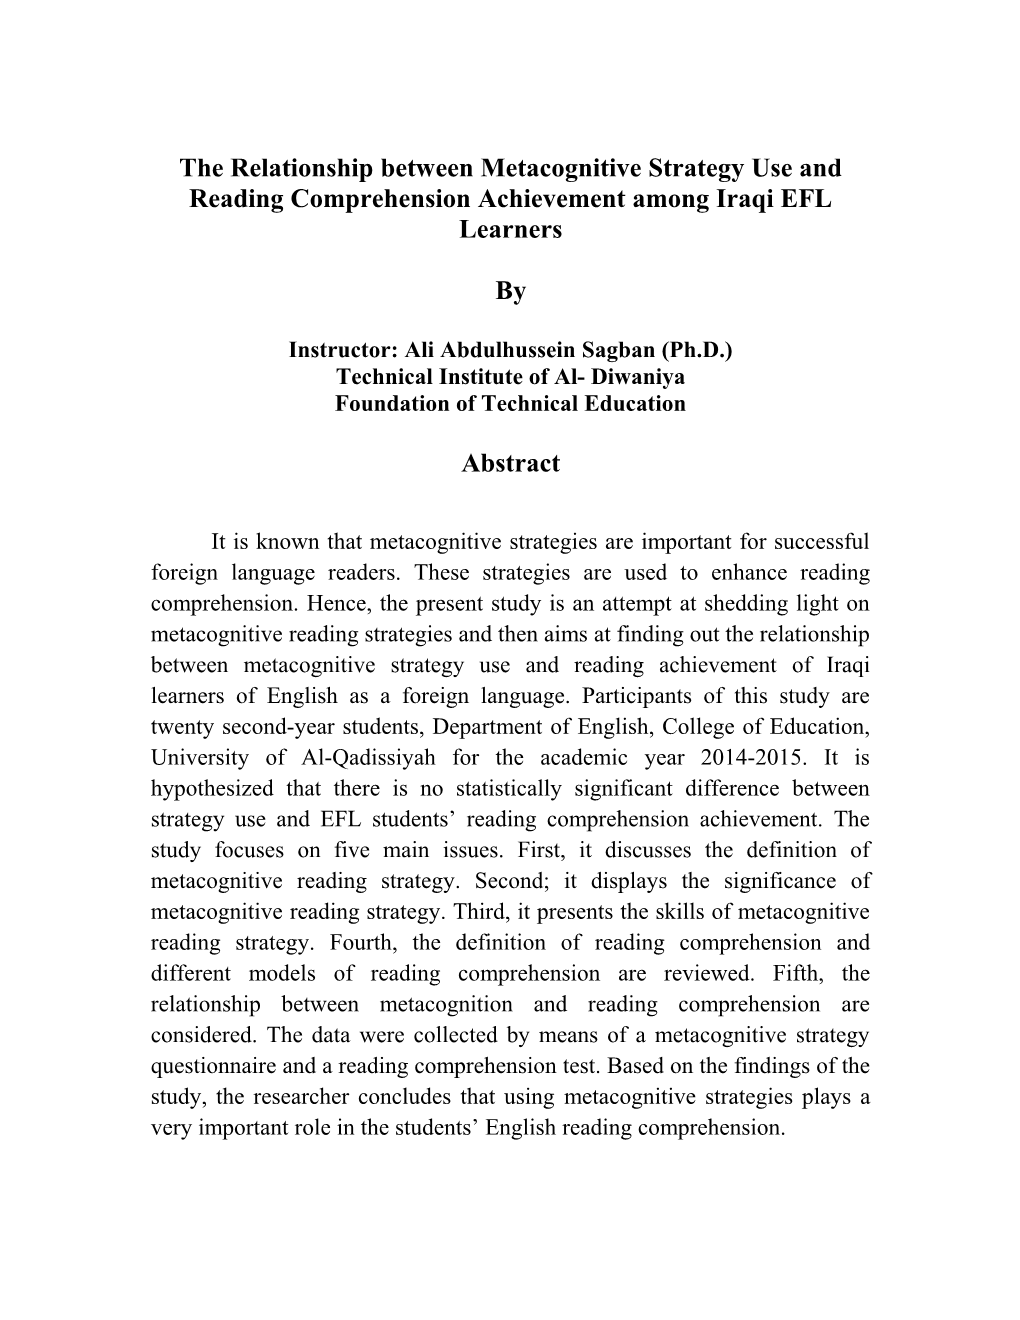 The Relationship Between Metacognitive Strategy Use and Reading Comprehension Achievement